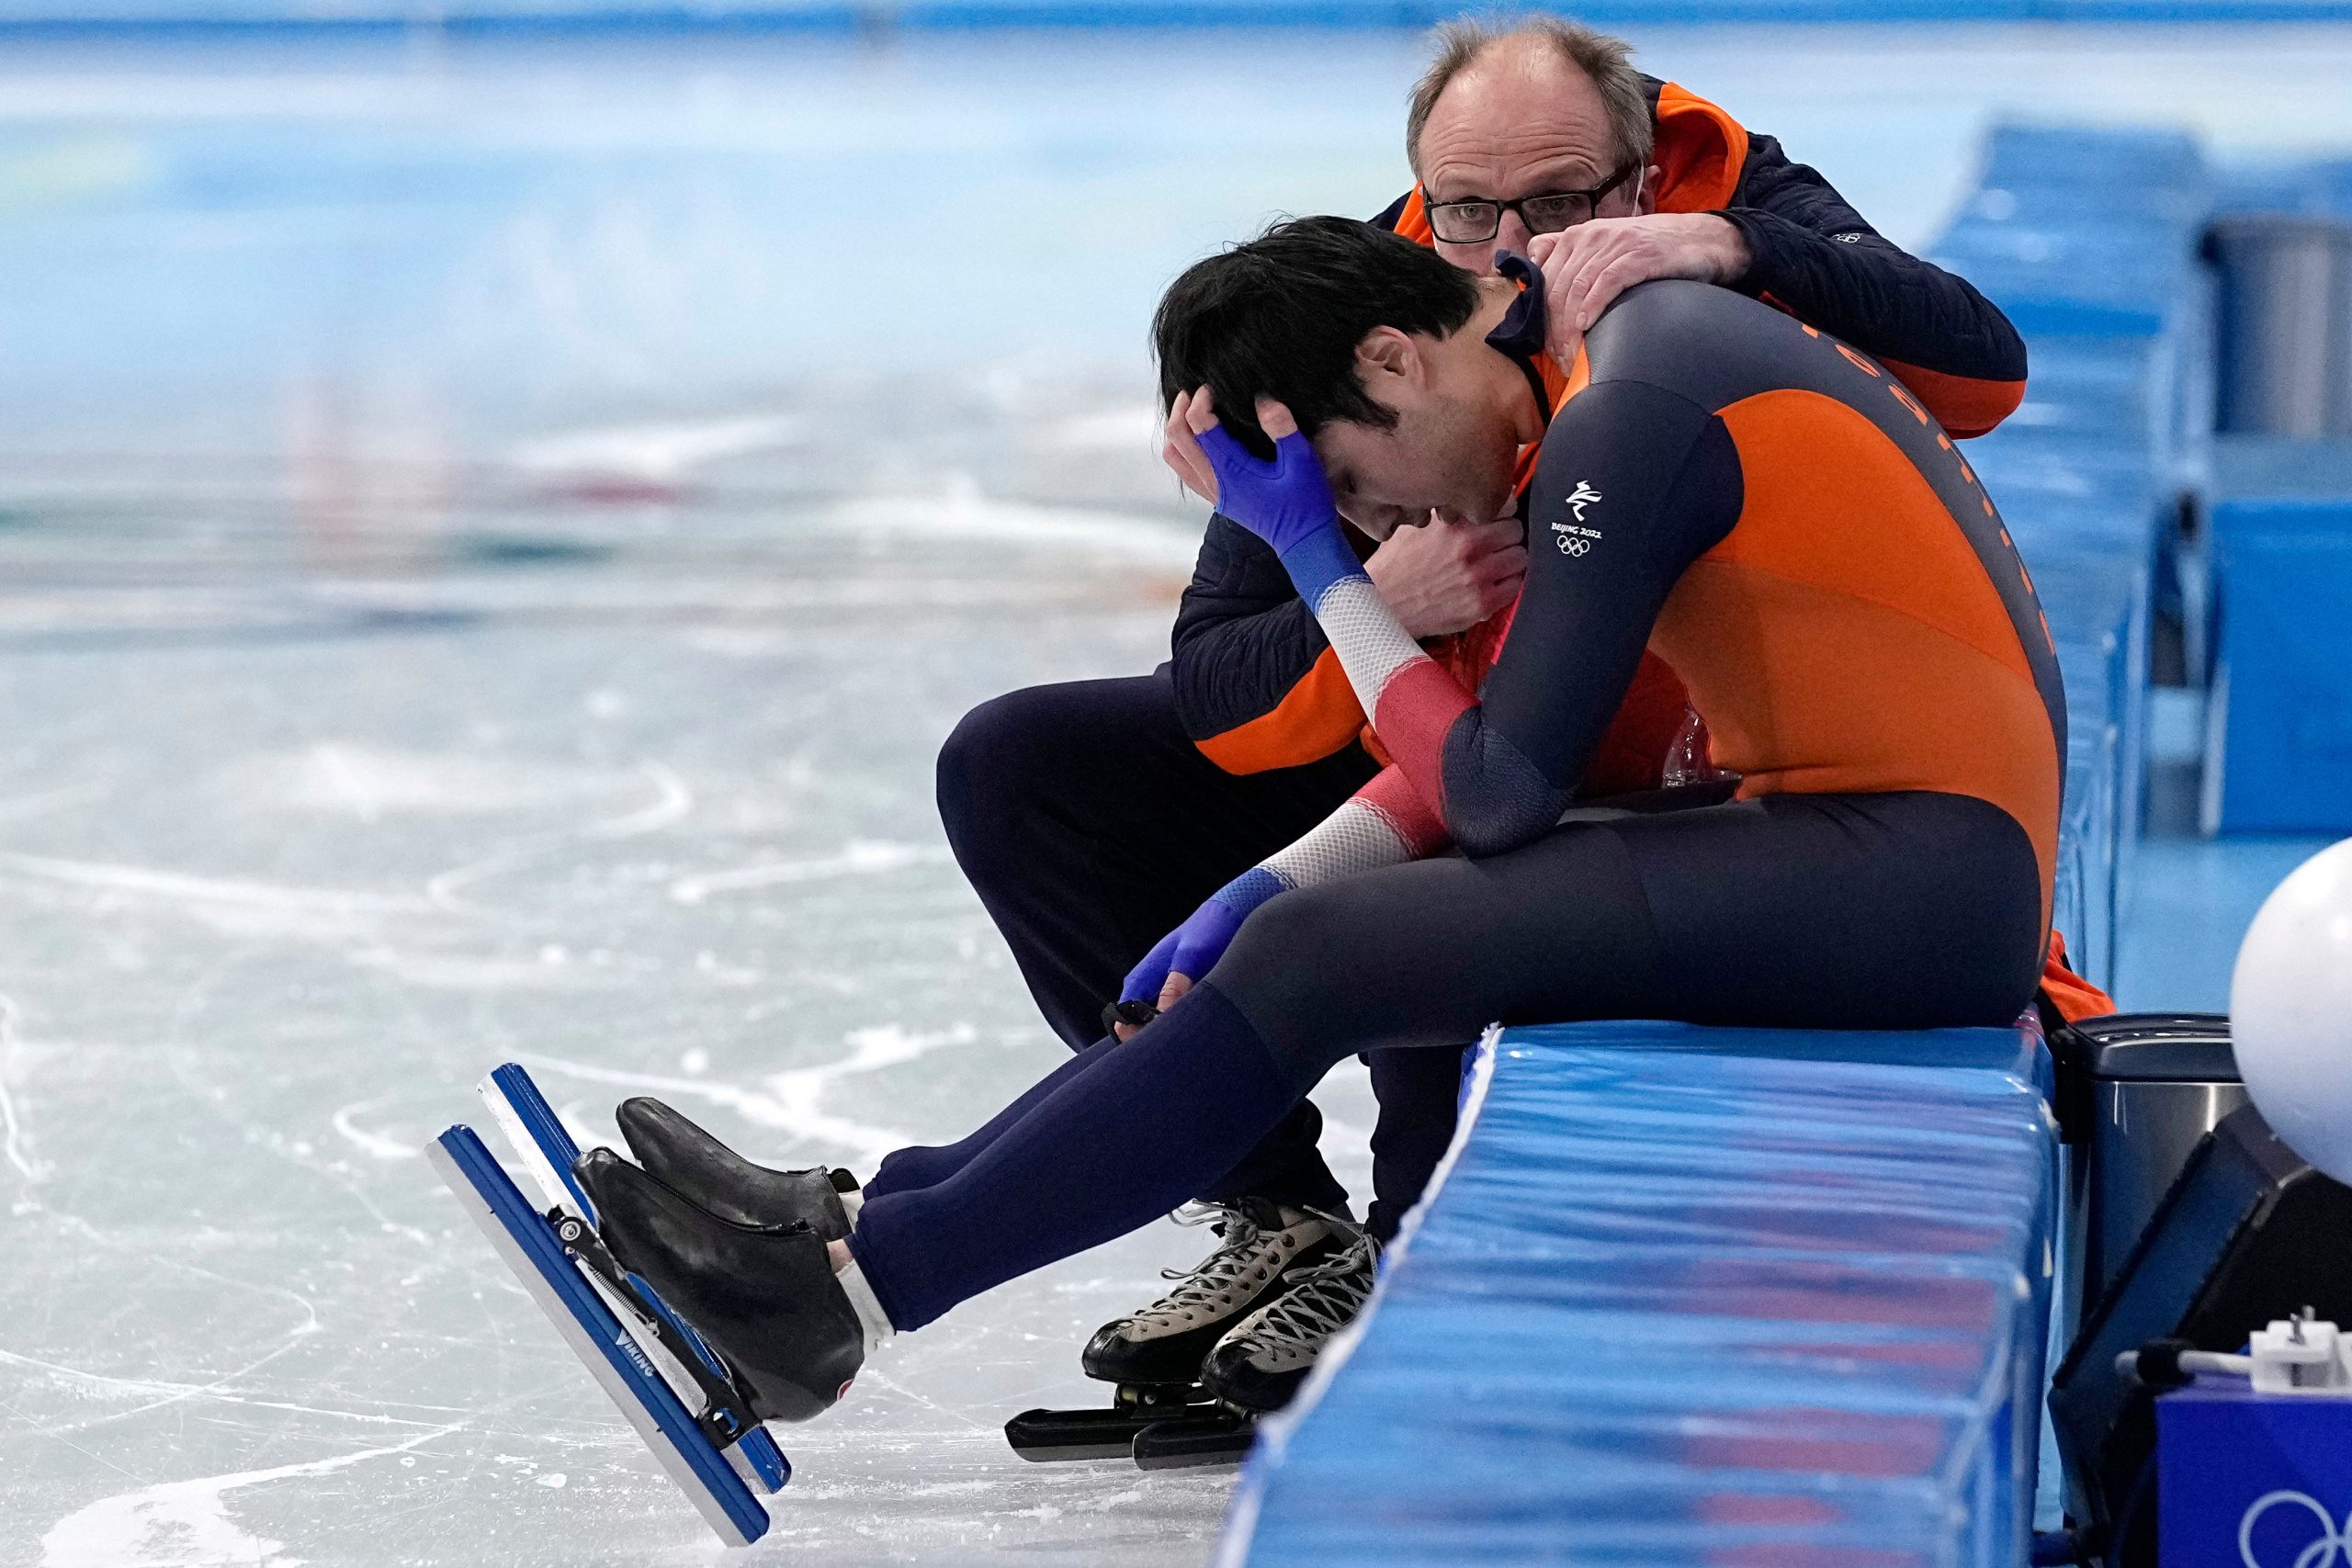 World champion’s mid-race sacrifice in speed skating final at Beijing Olympics 2022. Watch